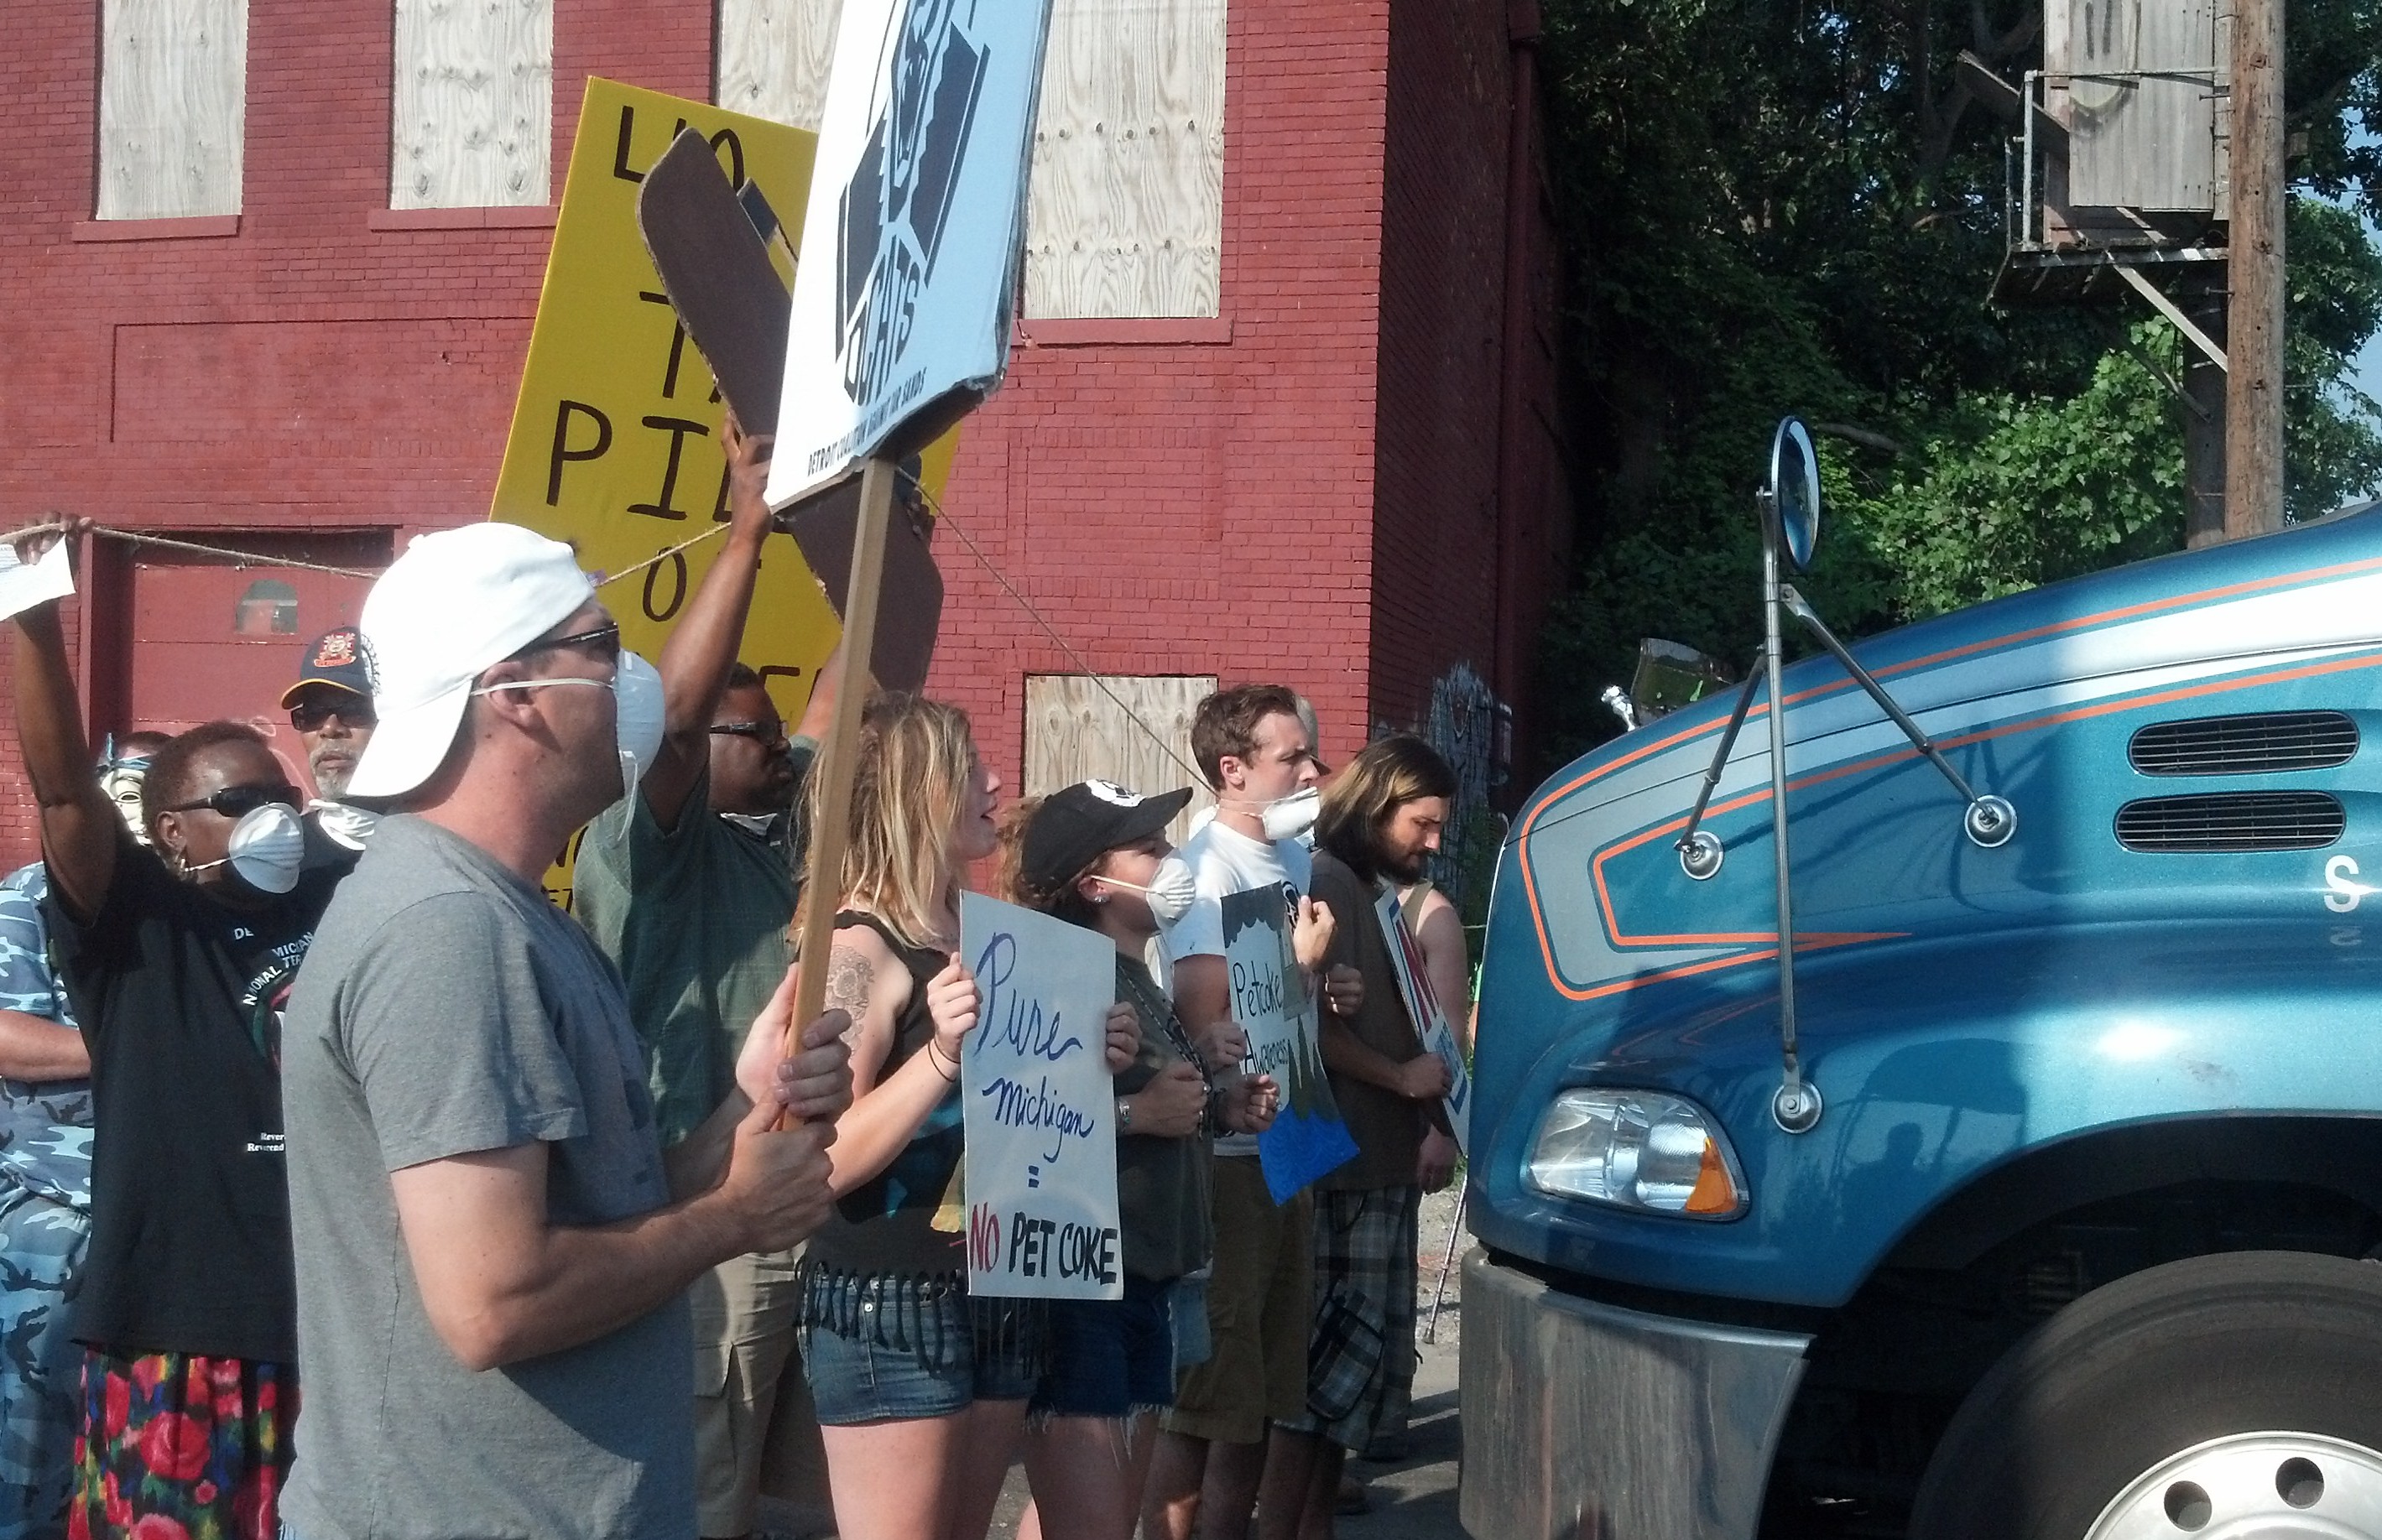 Protesters block access to a Detroit dock. (credit: Ron Dewey/WWJ)